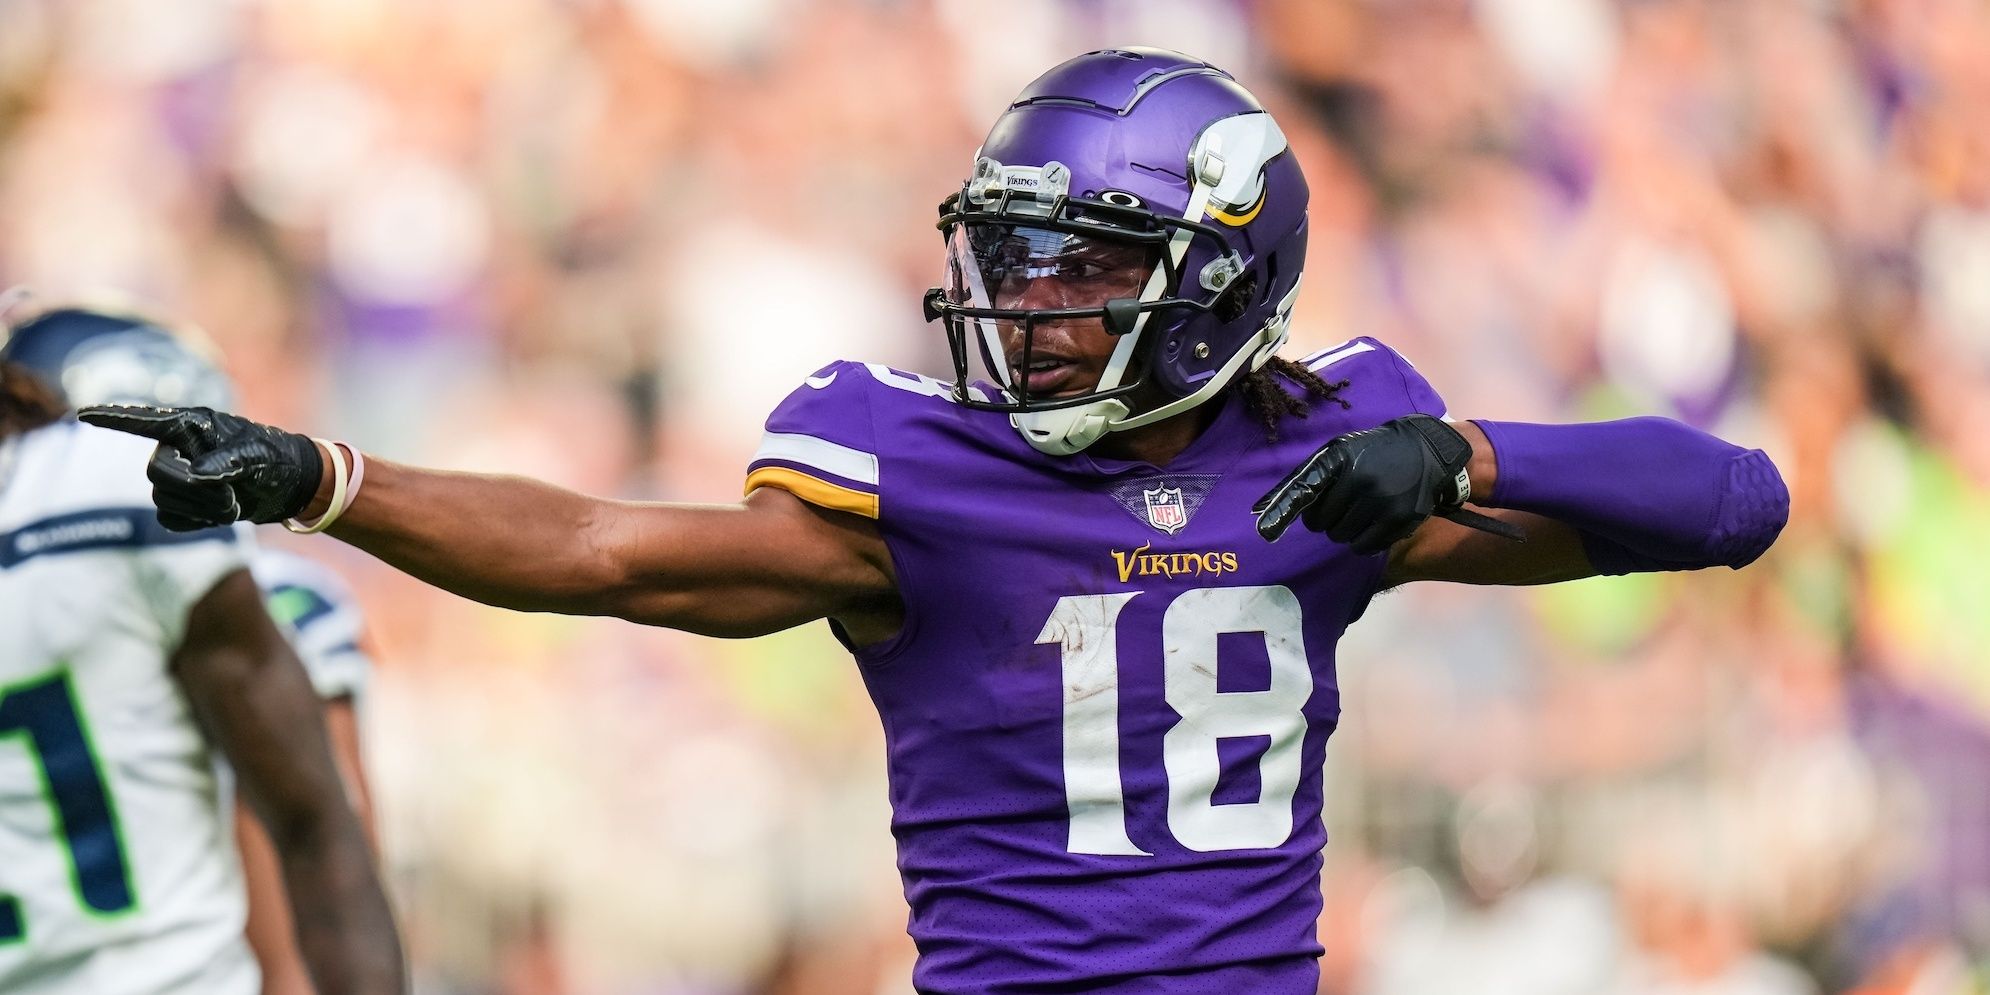 Justin Jefferson pointing to celebrate a first down in a purple Vikings jersey